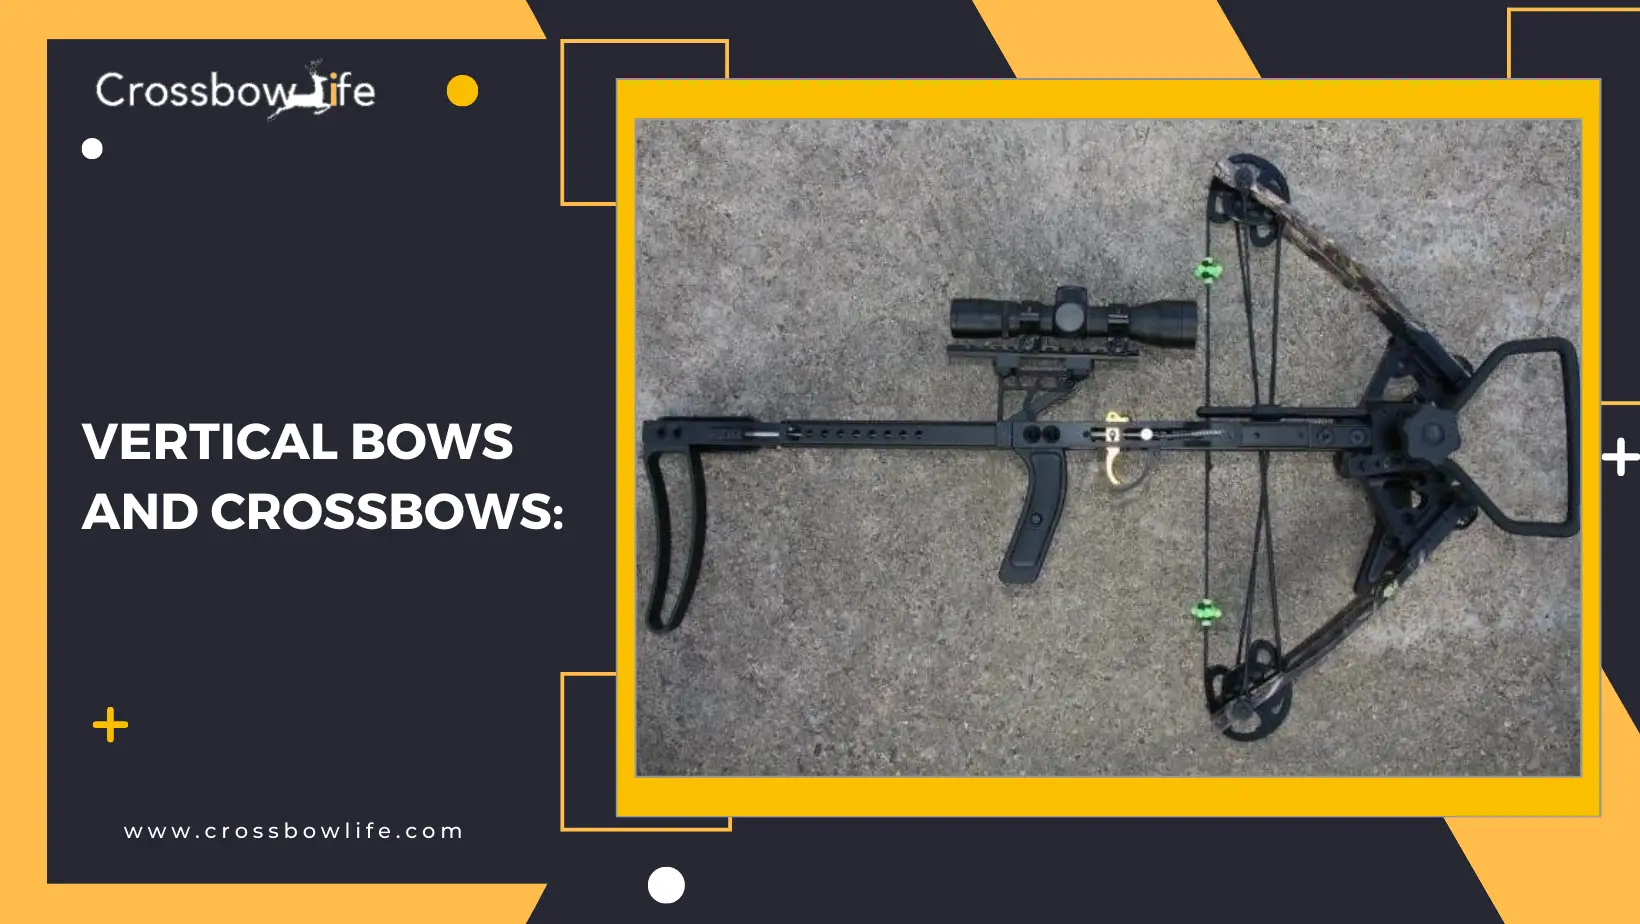 Comparison Between the Crossbows and Compound Bows